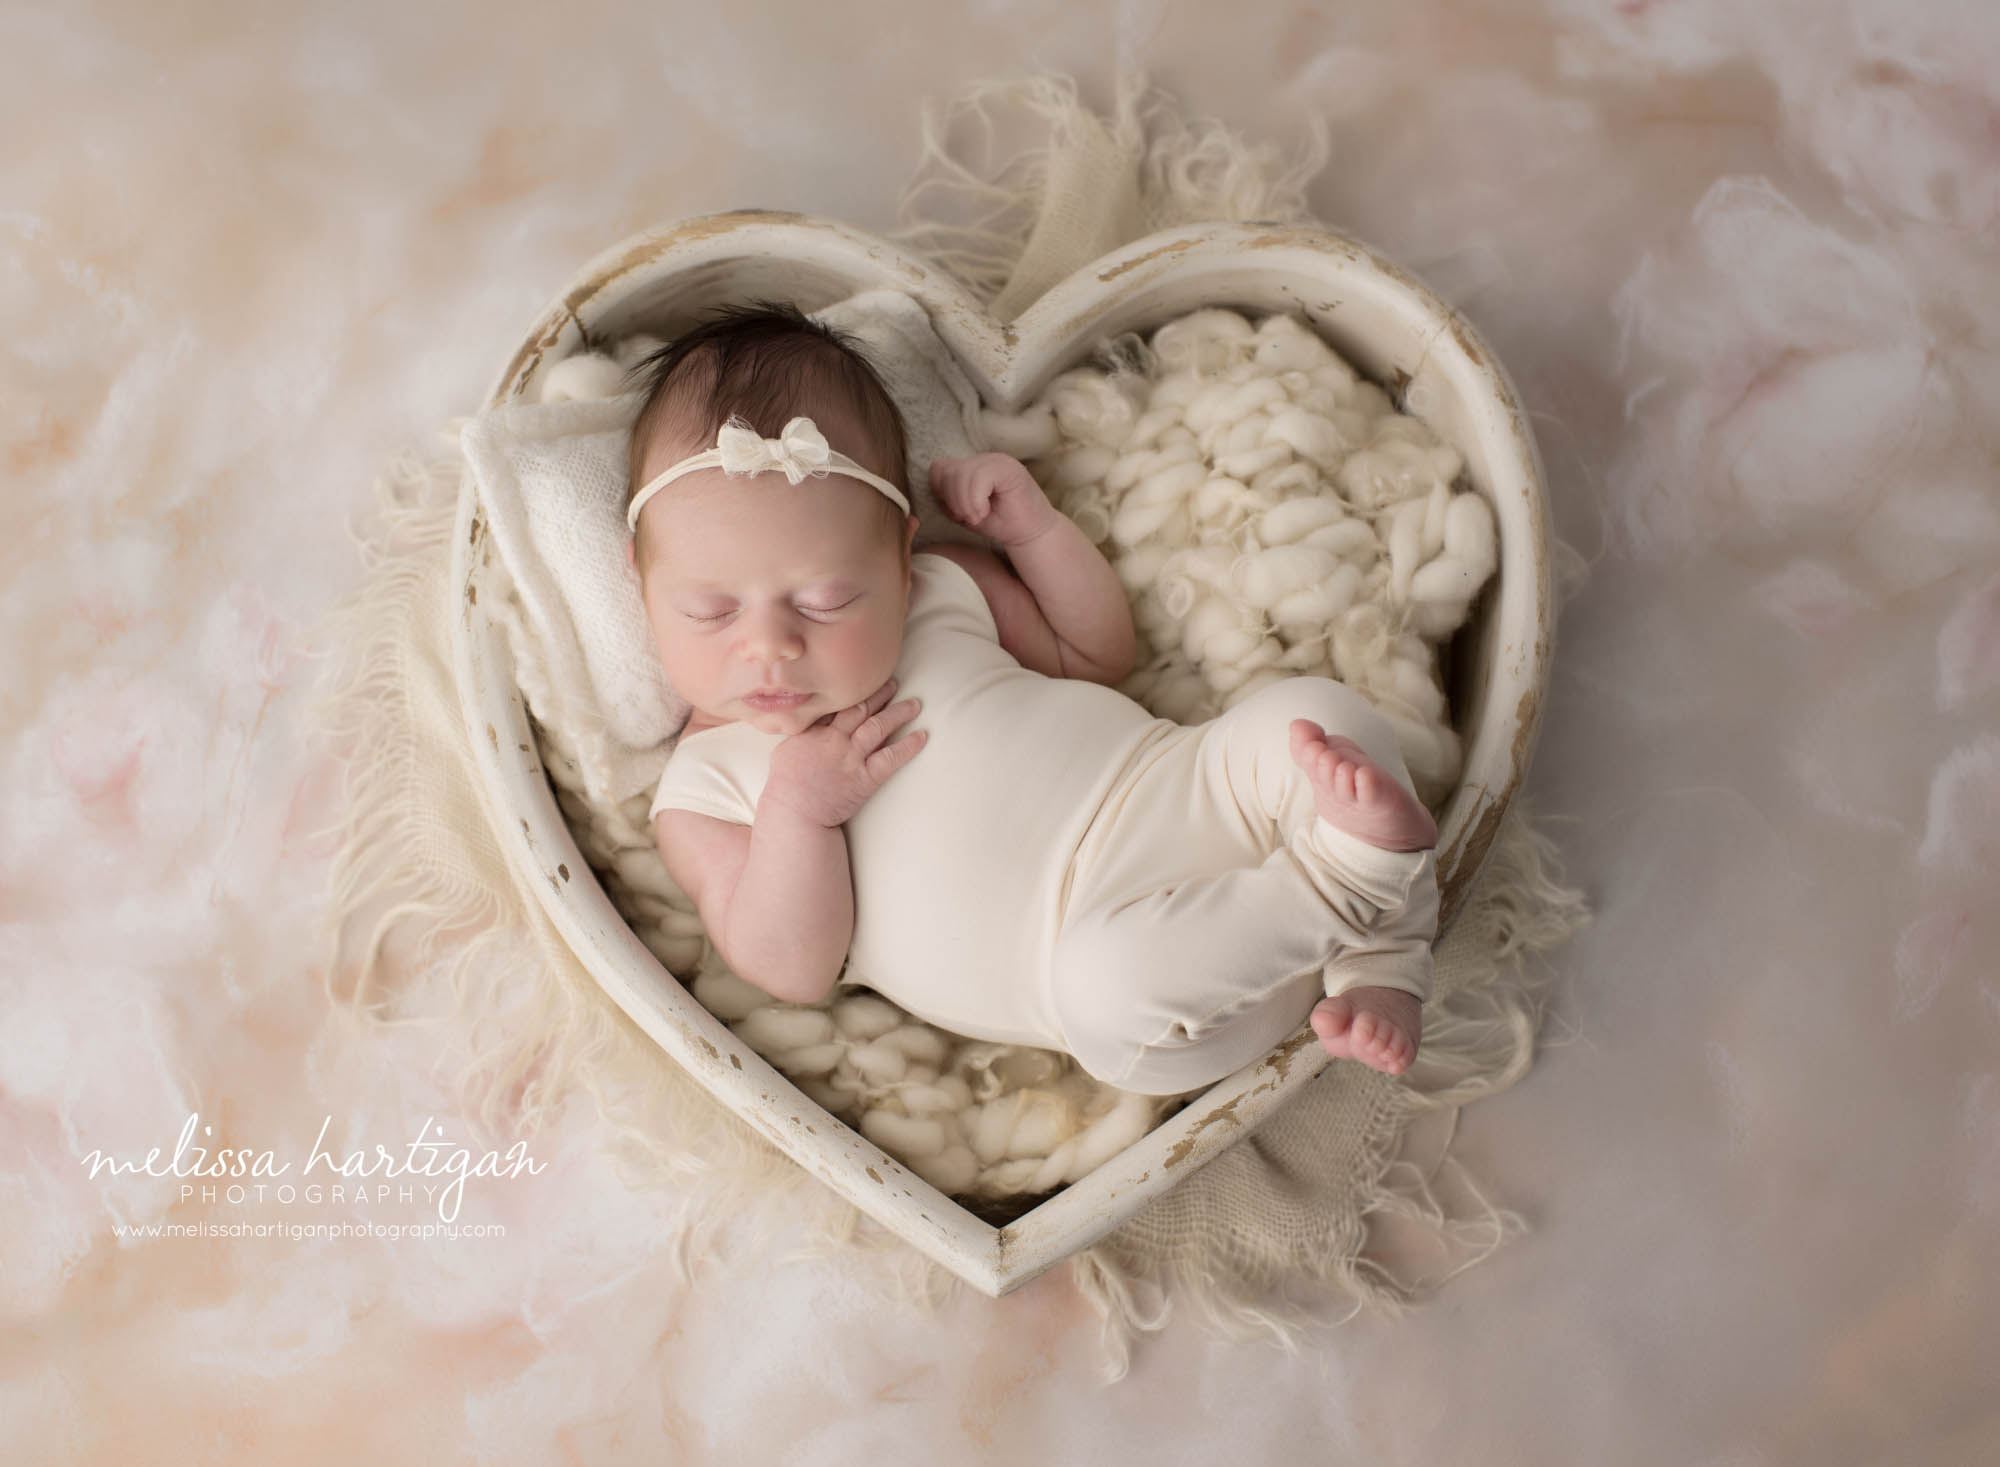 newborn baby girl wearing baby girl cream colored outfit posed in cream wooden heart bowl prop windsor locks ct baby photogaphy